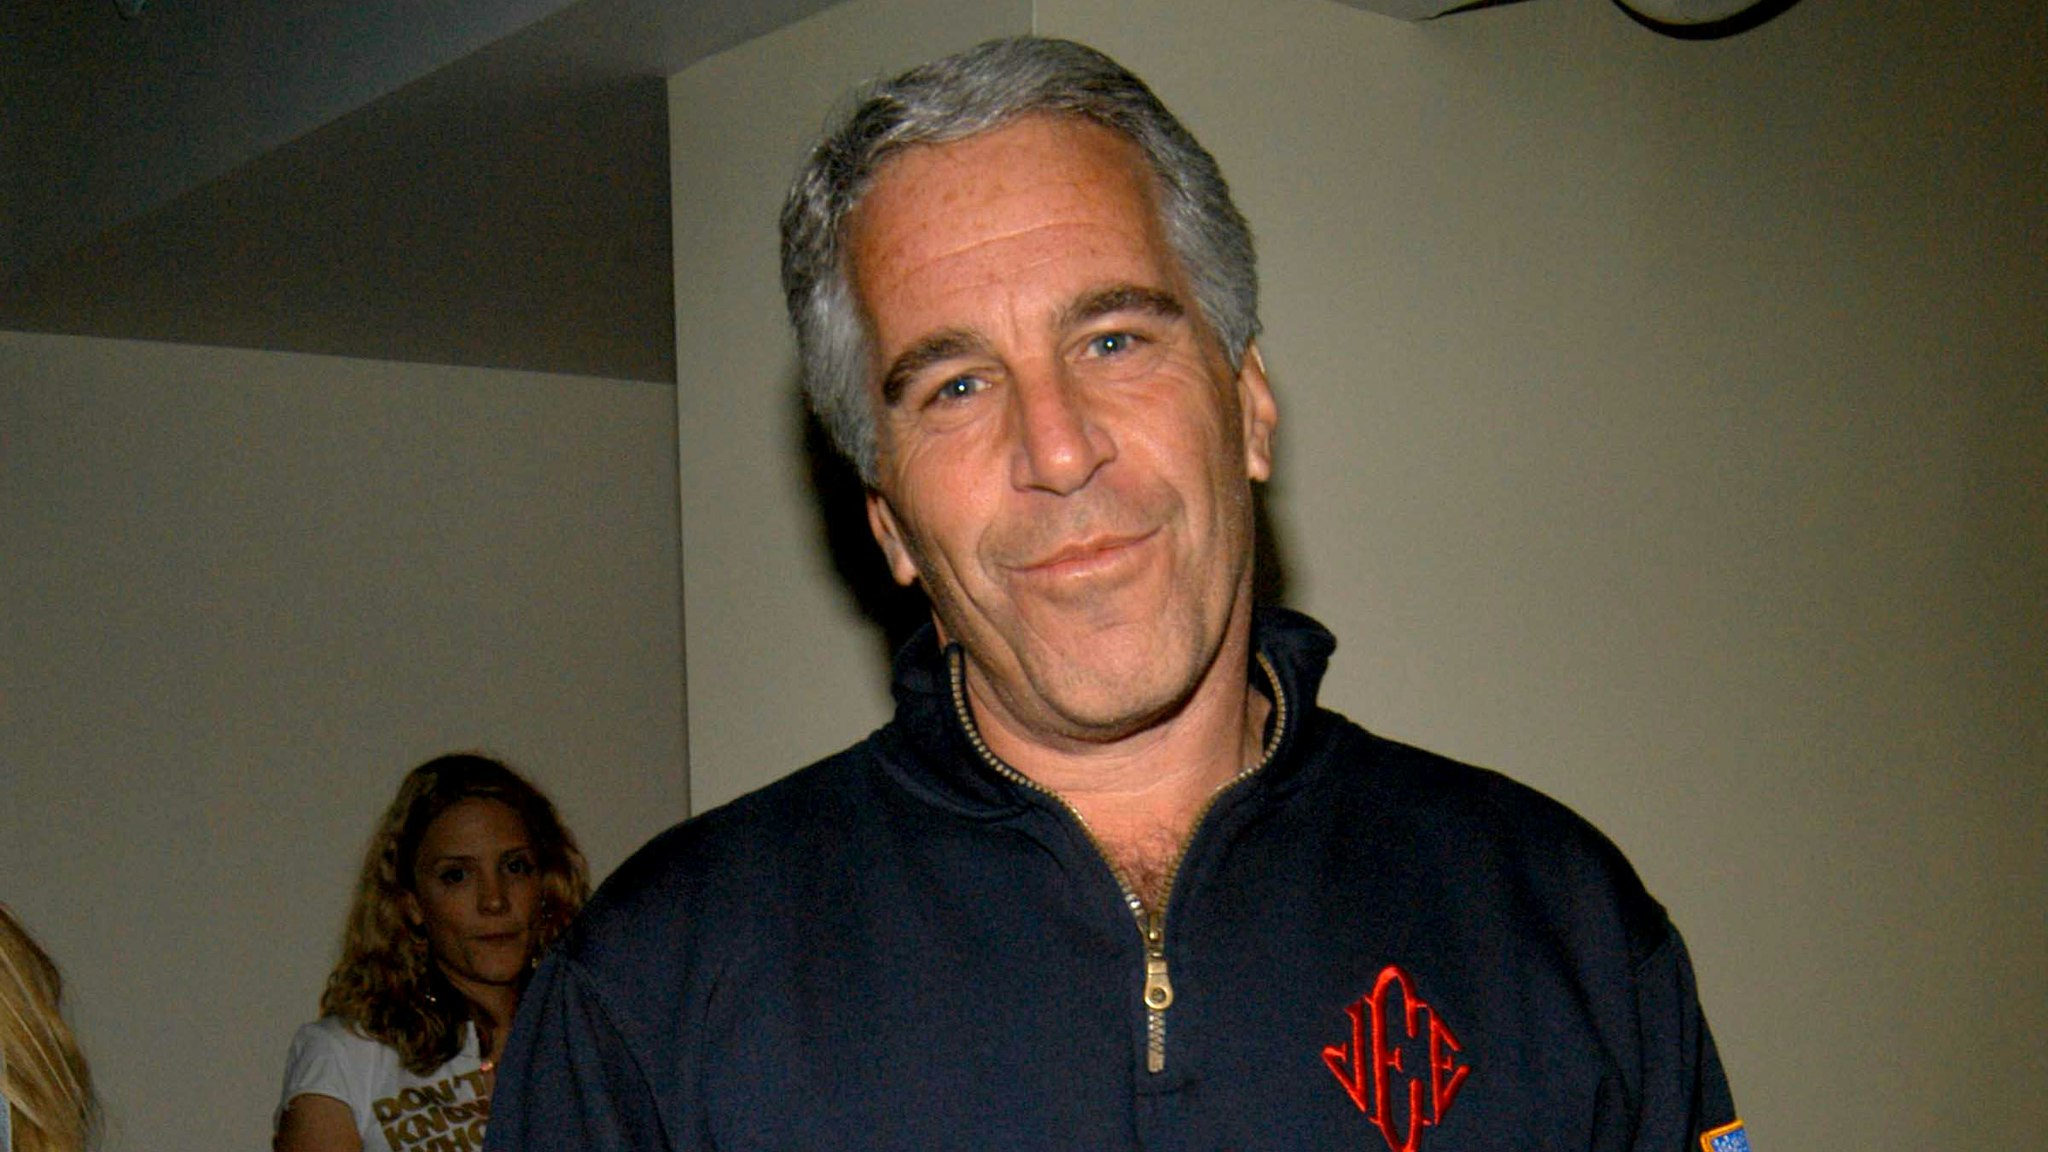 NEW YORK, NY - MAY 18: Jeffrey Epstein attends Launch of RADAR MAGAZINE at Hotel QT on May 18, 2005.